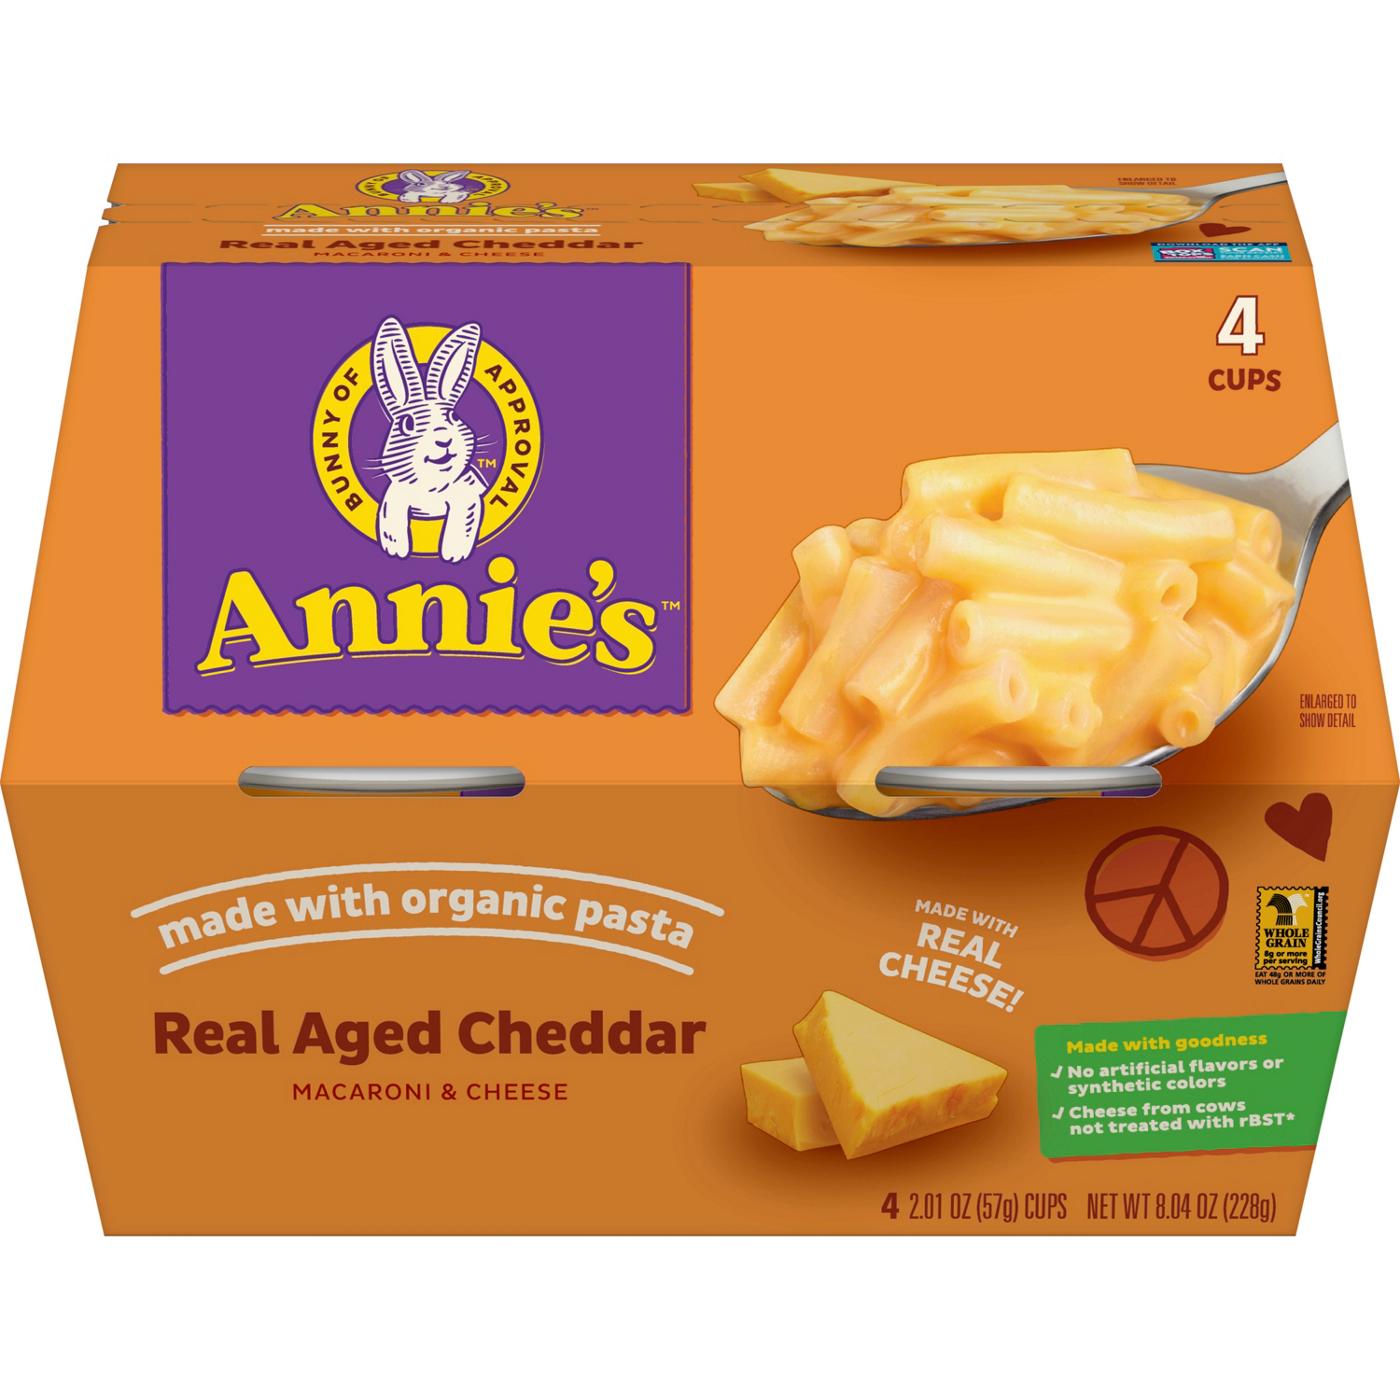 Annie's Real Aged Cheddar Macaroni & Cheese Cups; image 1 of 2